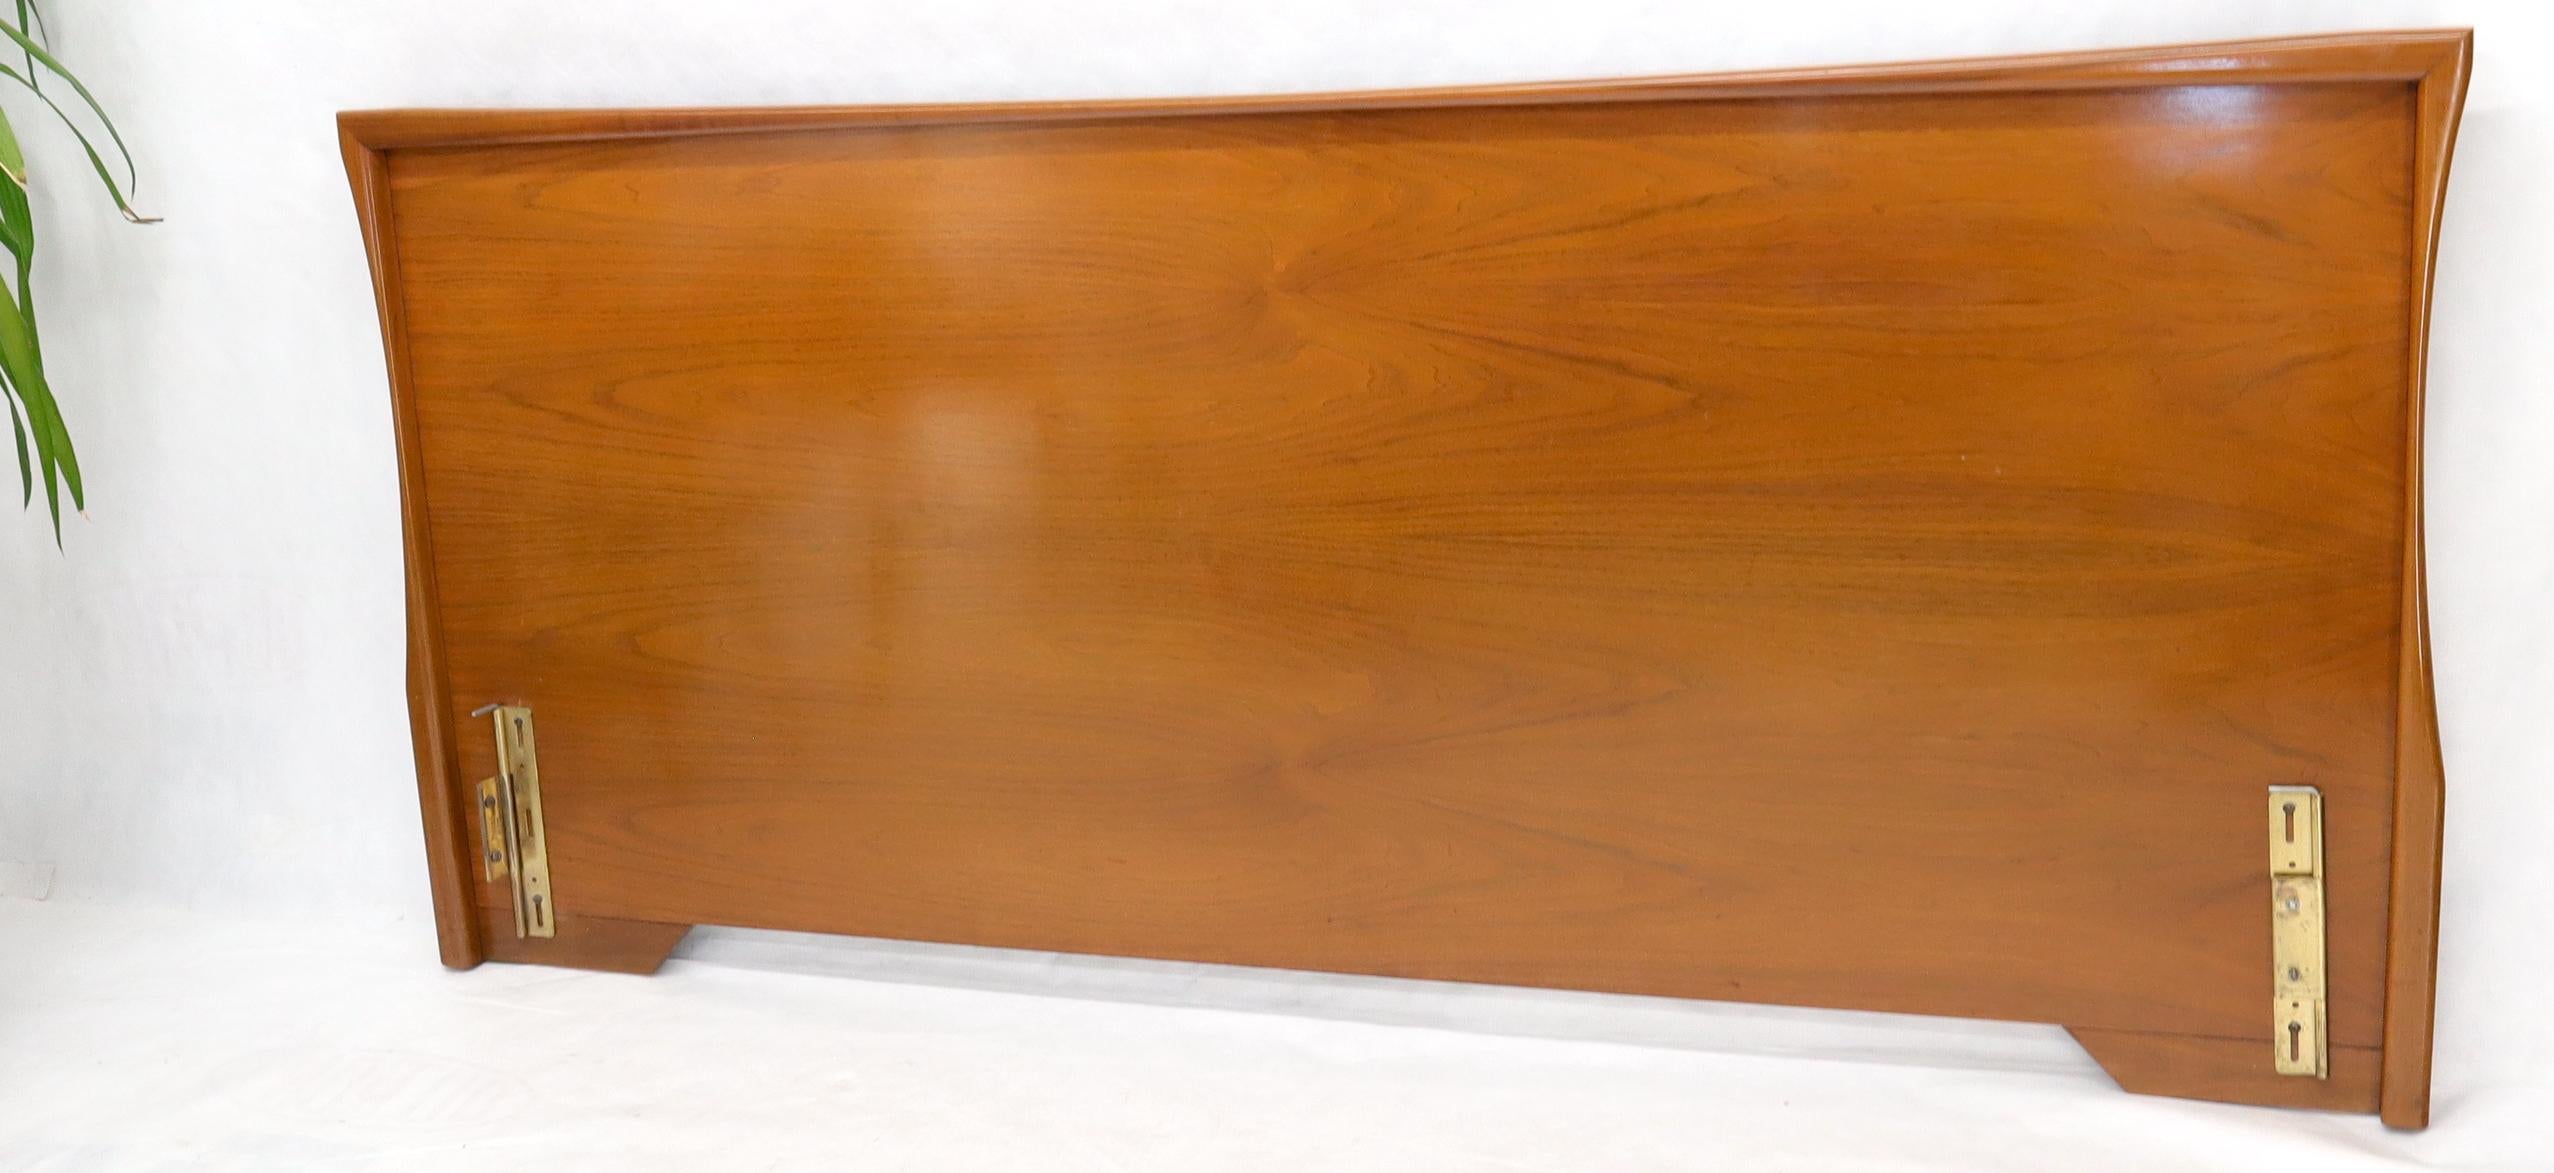 Lacquered Large Sculptural Light Mid-Century Modern Walnut King Size Headboard Bed For Sale